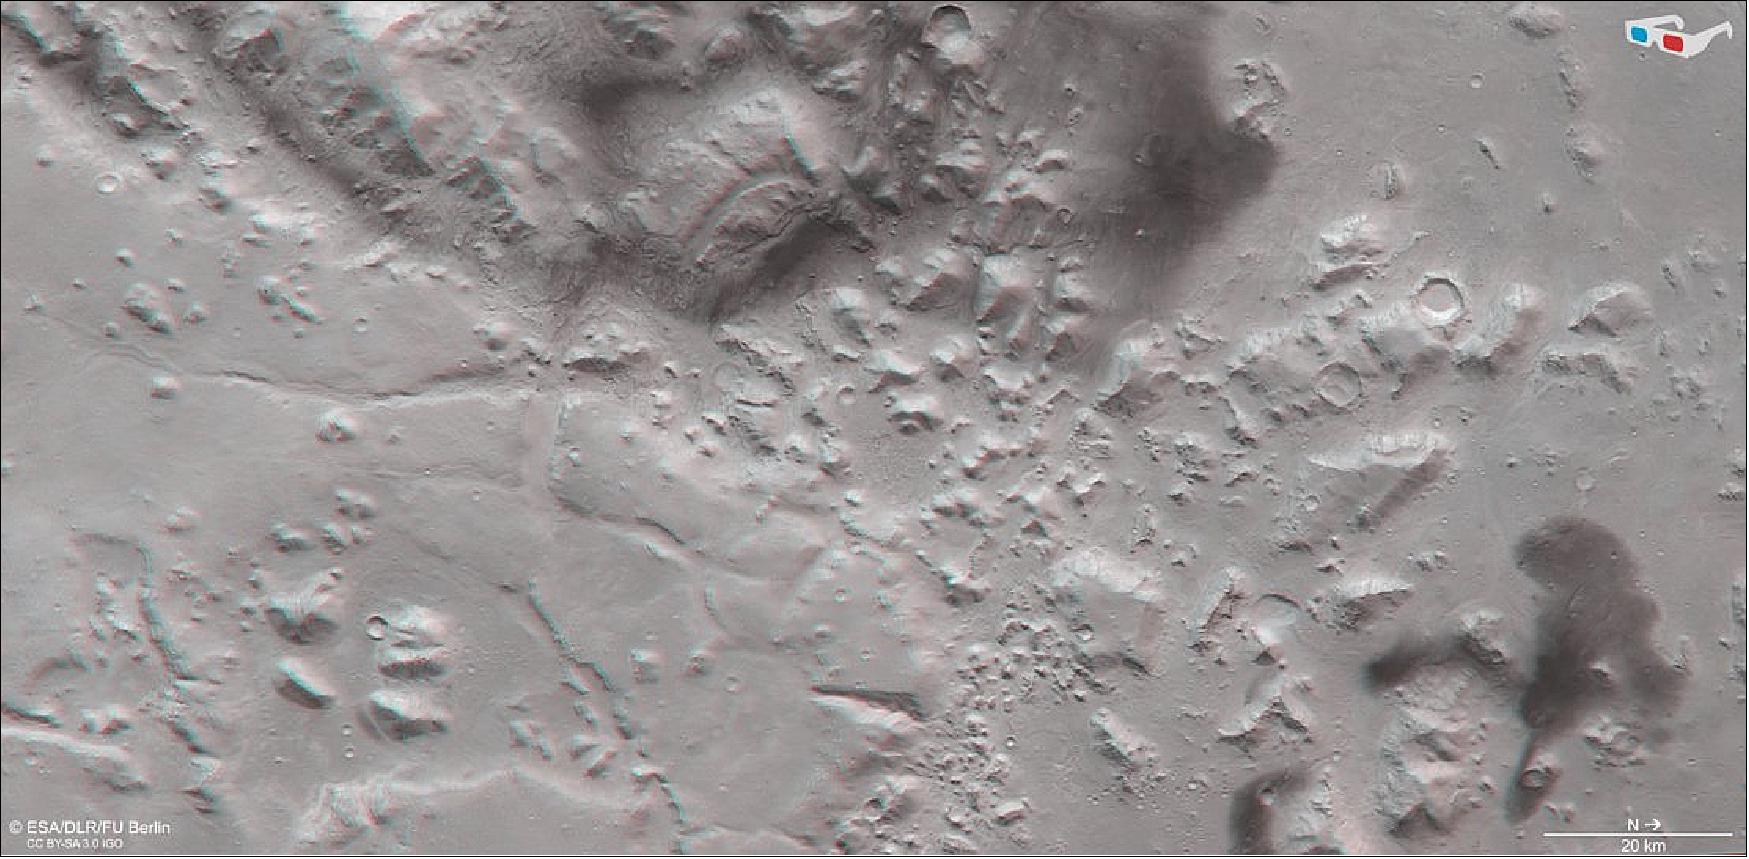 Figure 68: This image shows Nil Fossae, an escarpment sitting between the northern lowlands and southern highlands of Mars, in 3D when viewed using red-green or red-blue glasses. This anaglyph was derived from data obtained by the nadir channel and one stereo channel of the High Resolution Stereo Camera (HRSC) on ESA’s Mars Express during spacecraft orbit 17916. It covers a part of the martian surface centered on 78ºE, 28ºN. North is to the right (image credit: ESA/DLR/FU Berlin, CC BY-SA 3.0 IGO)